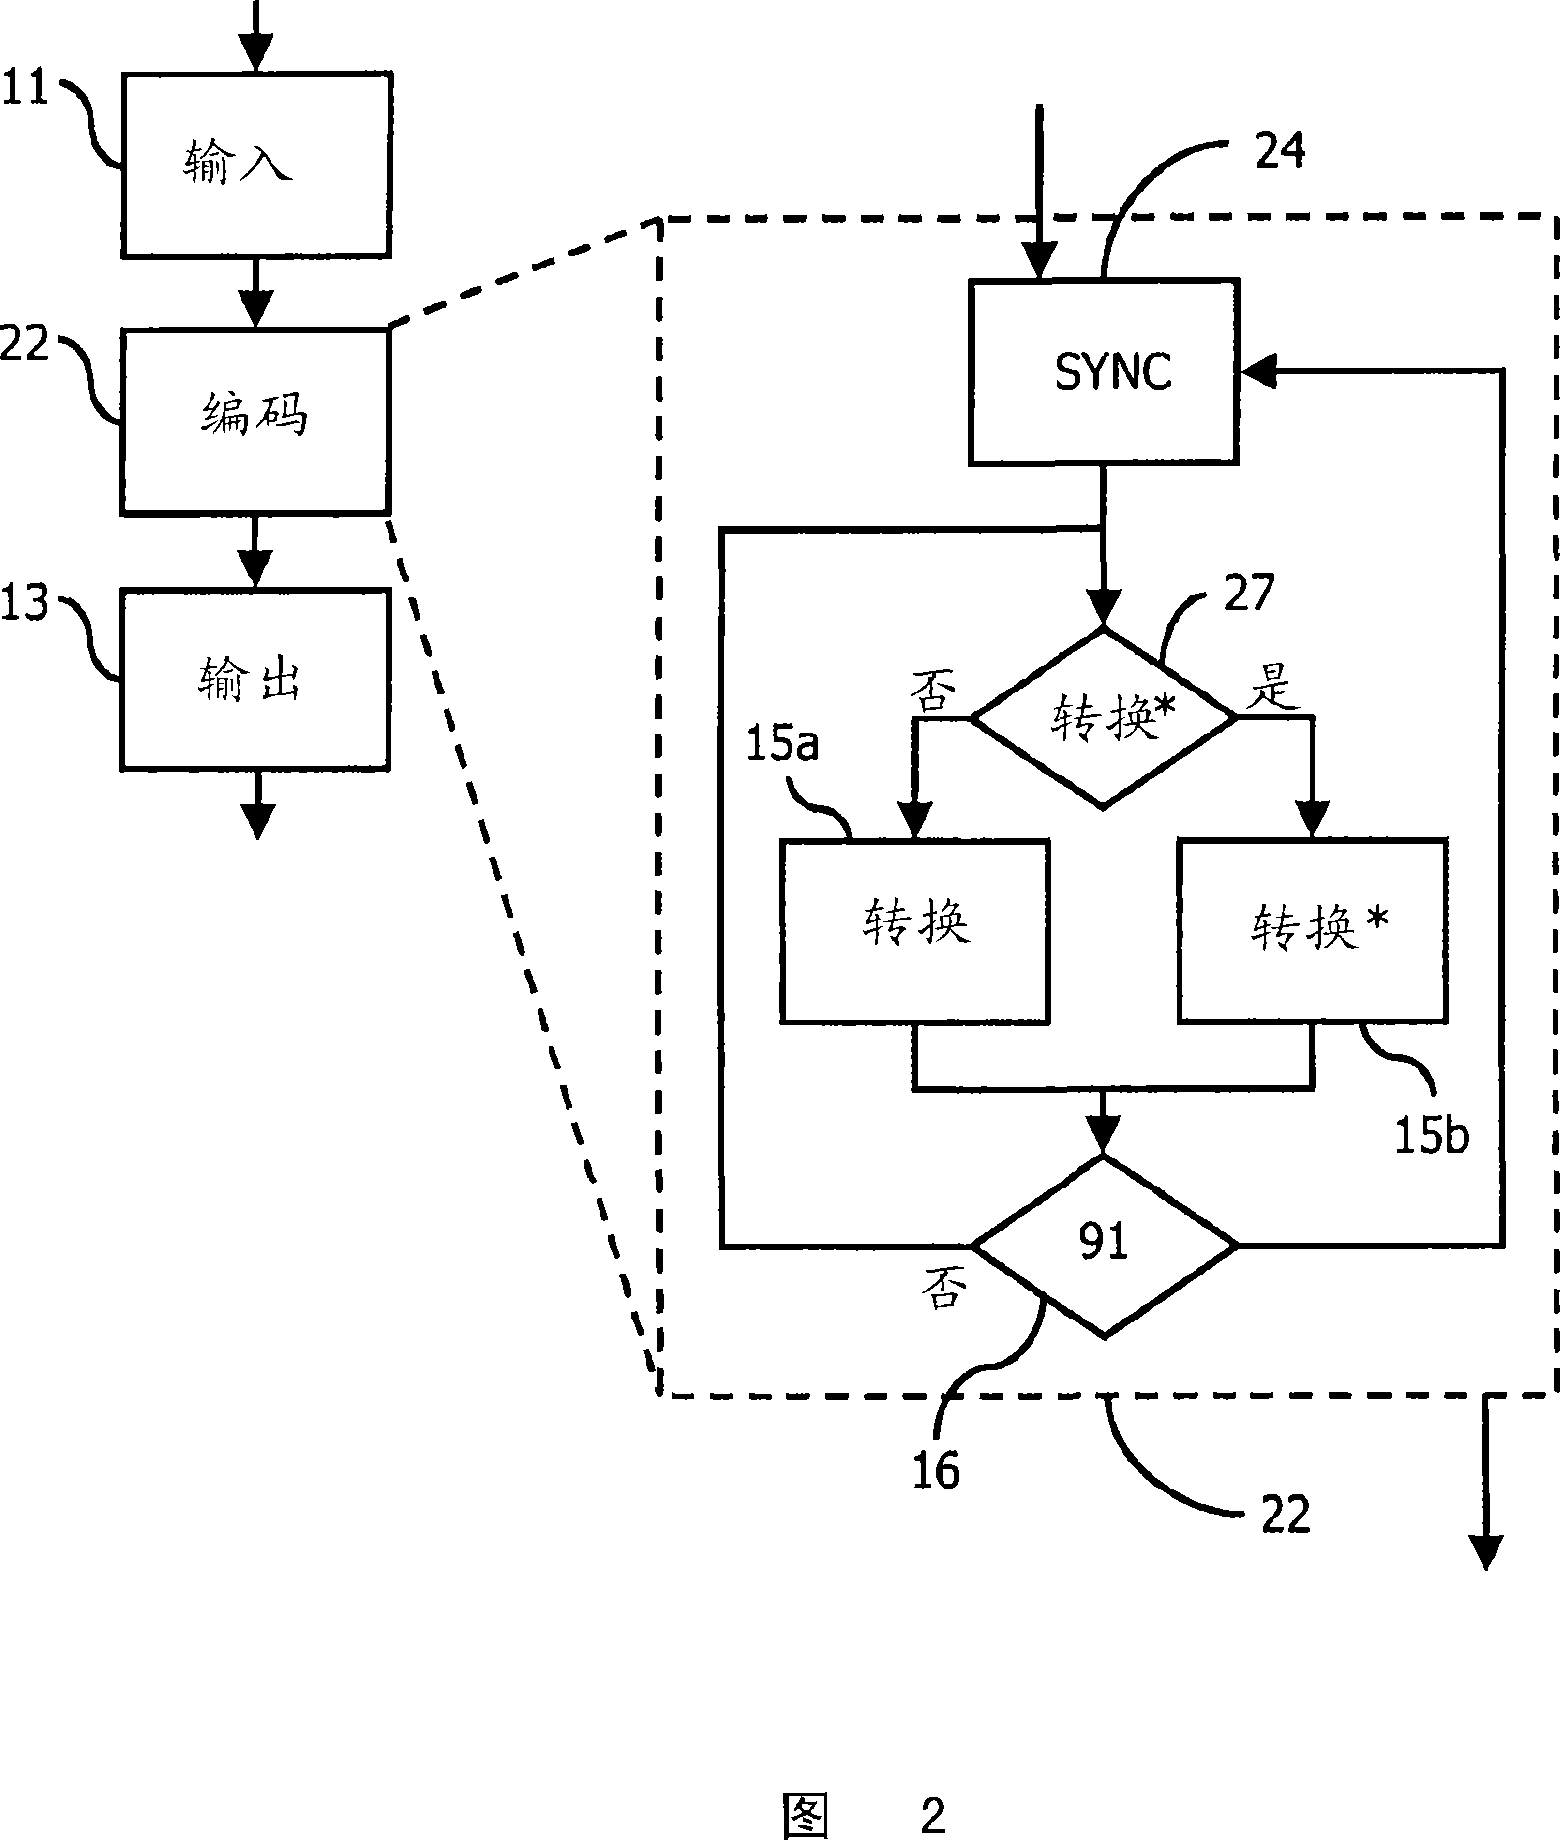 Method for providing an output signal for storing of user data on a data carrier